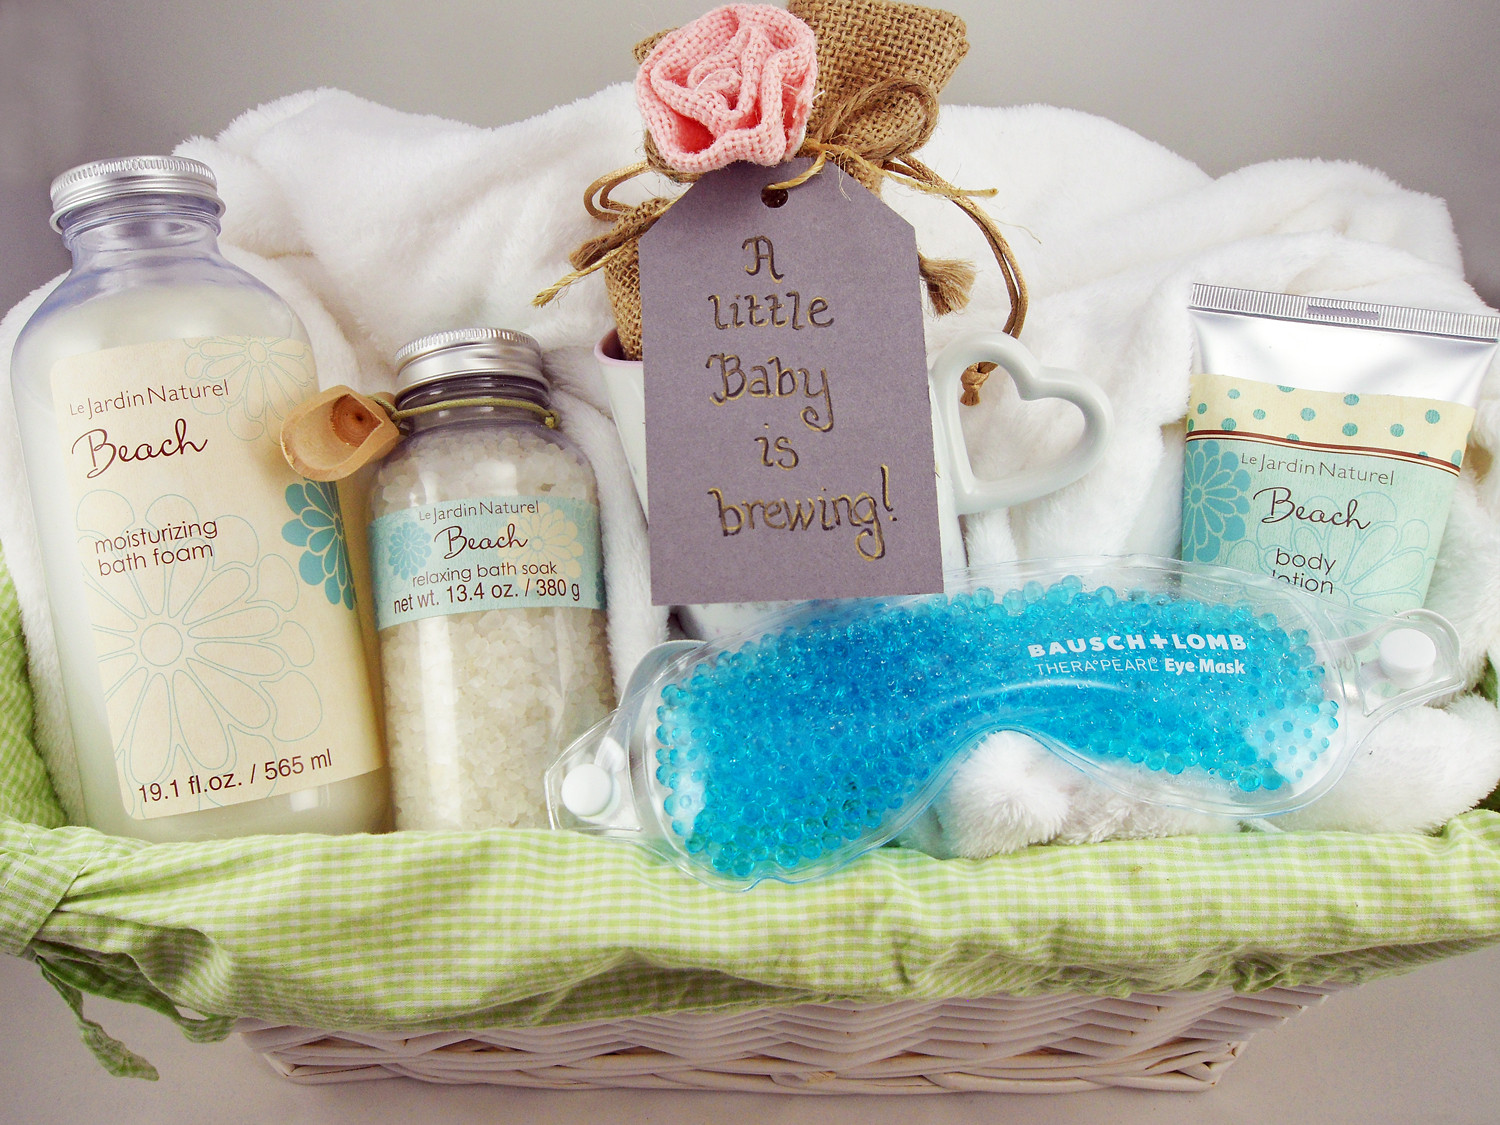 Gift Ideas For Family With New Baby
 Expecting Couples Love These Unique Personalized Baby Gifts